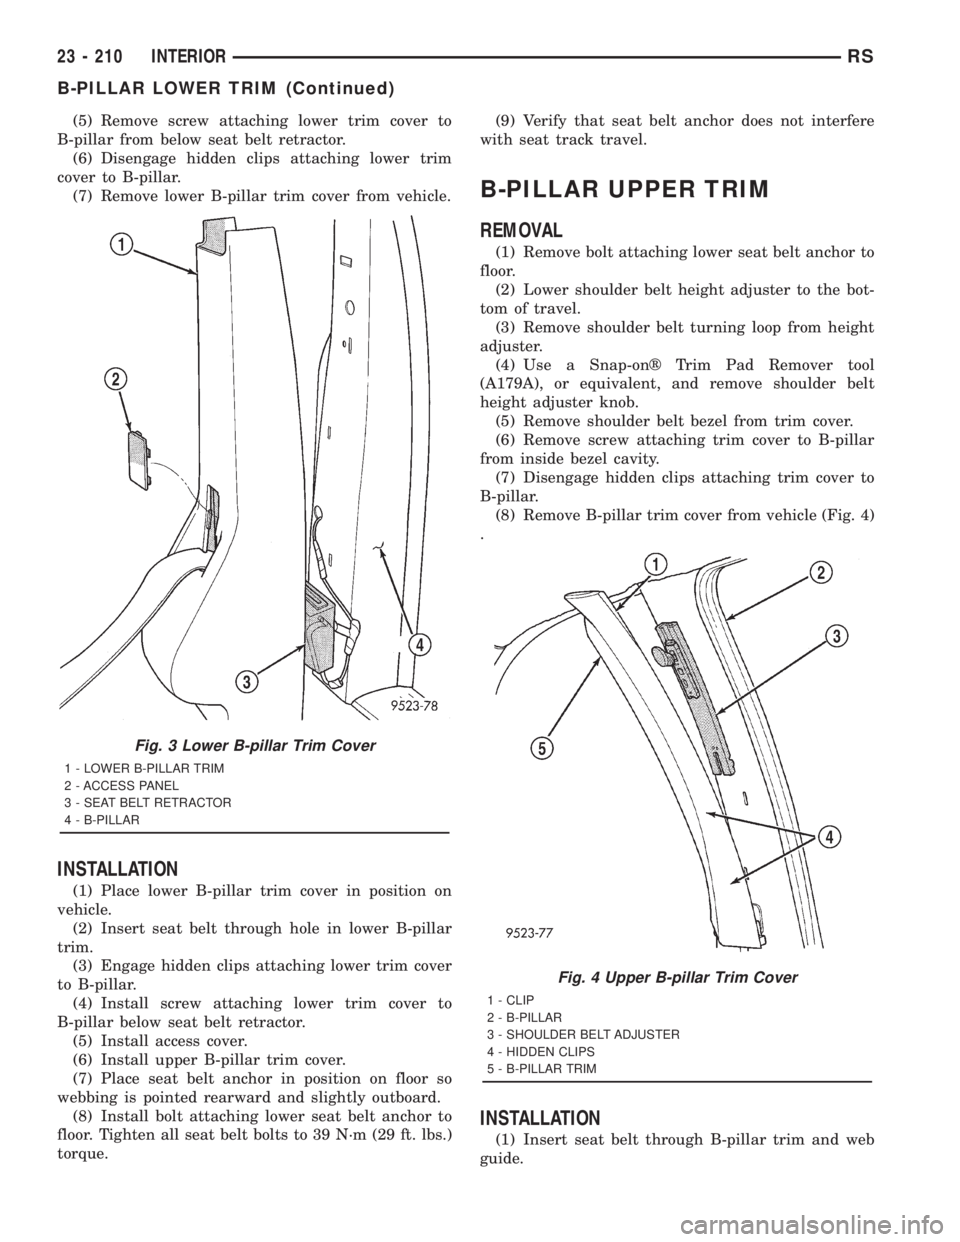 CHRYSLER VOYAGER 2001  Service Manual (5) Remove screw attaching lower trim cover to
B-pillar from below seat belt retractor.
(6) Disengage hidden clips attaching lower trim
cover to B-pillar.
(7) Remove lower B-pillar trim cover from veh